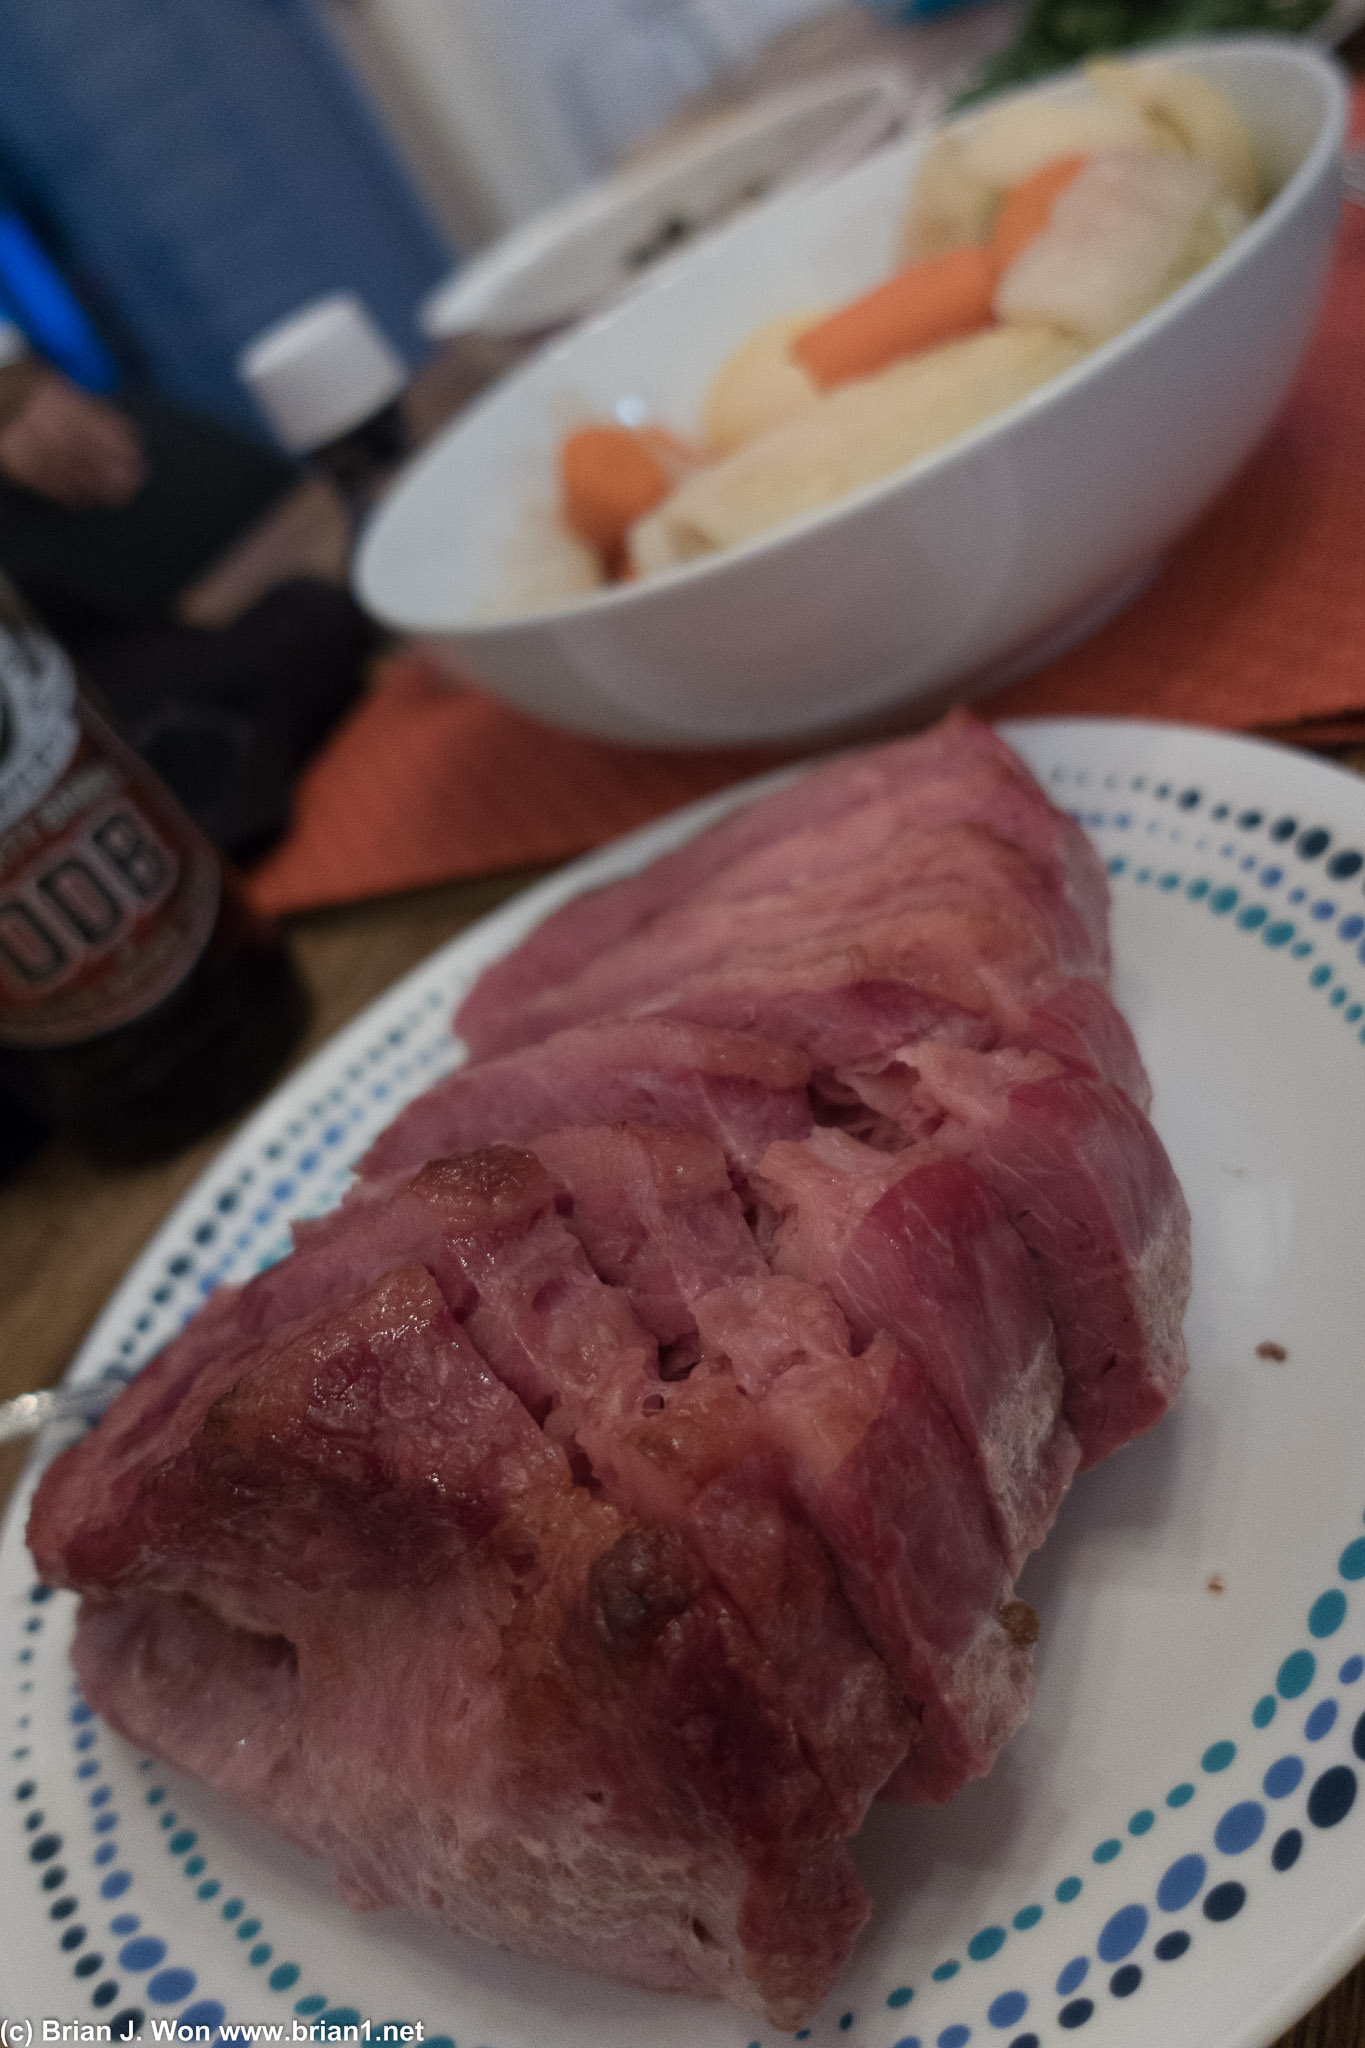 Corned beef for St. Patrick's Day.